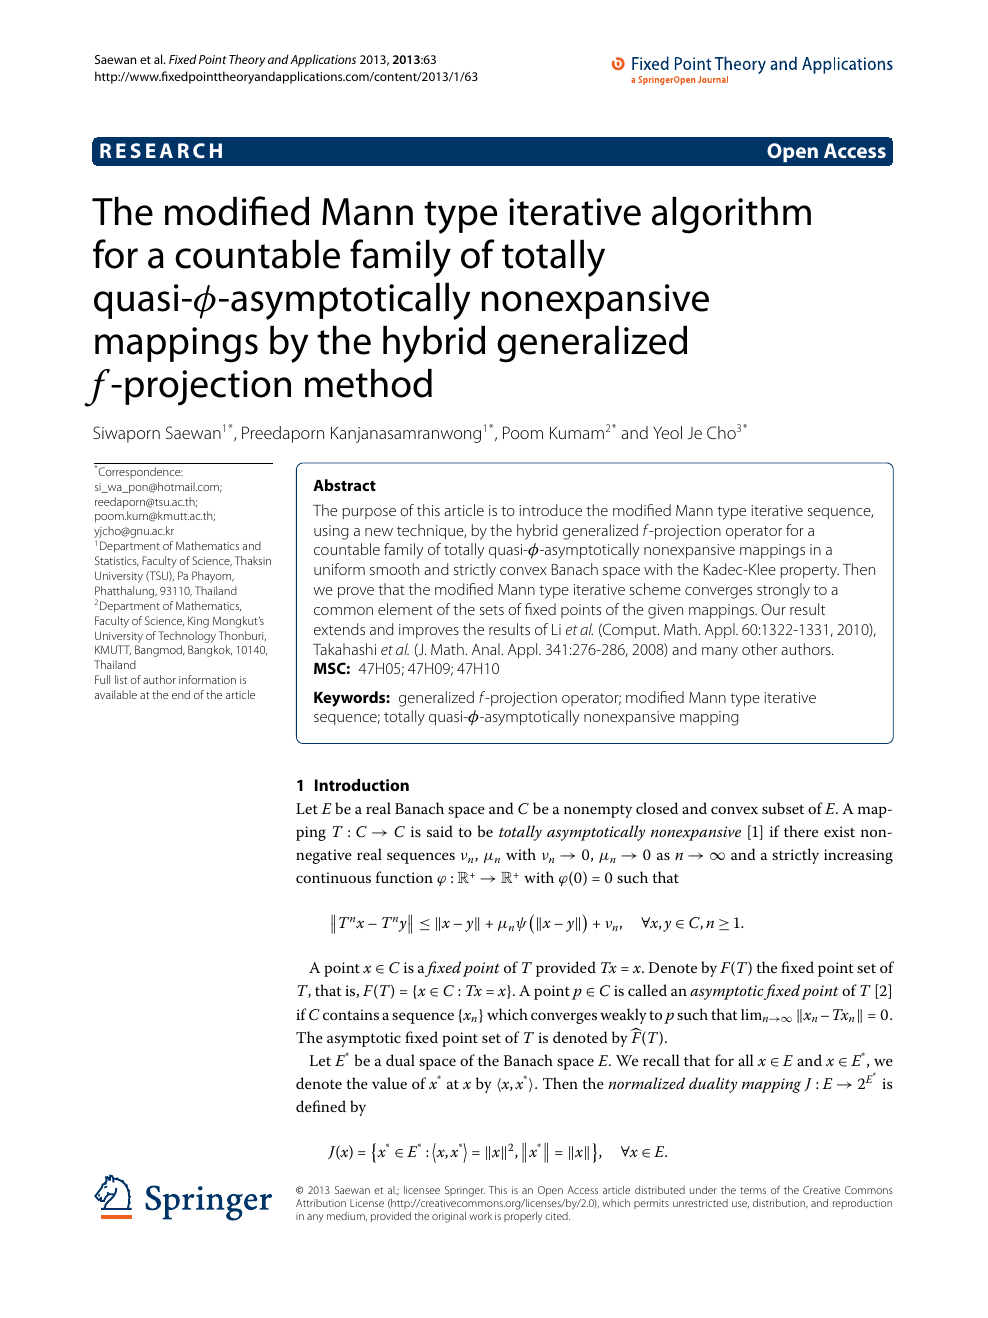 The Modified Mann Type Iterative Algorithm For A Countable Family Of Totally Quasi ϕ Asymptotically Nonexpansive Mappings By The Hybrid Generalized F Projection Method Topic Of Research Paper In Mathematics Download Scholarly Article Pdf